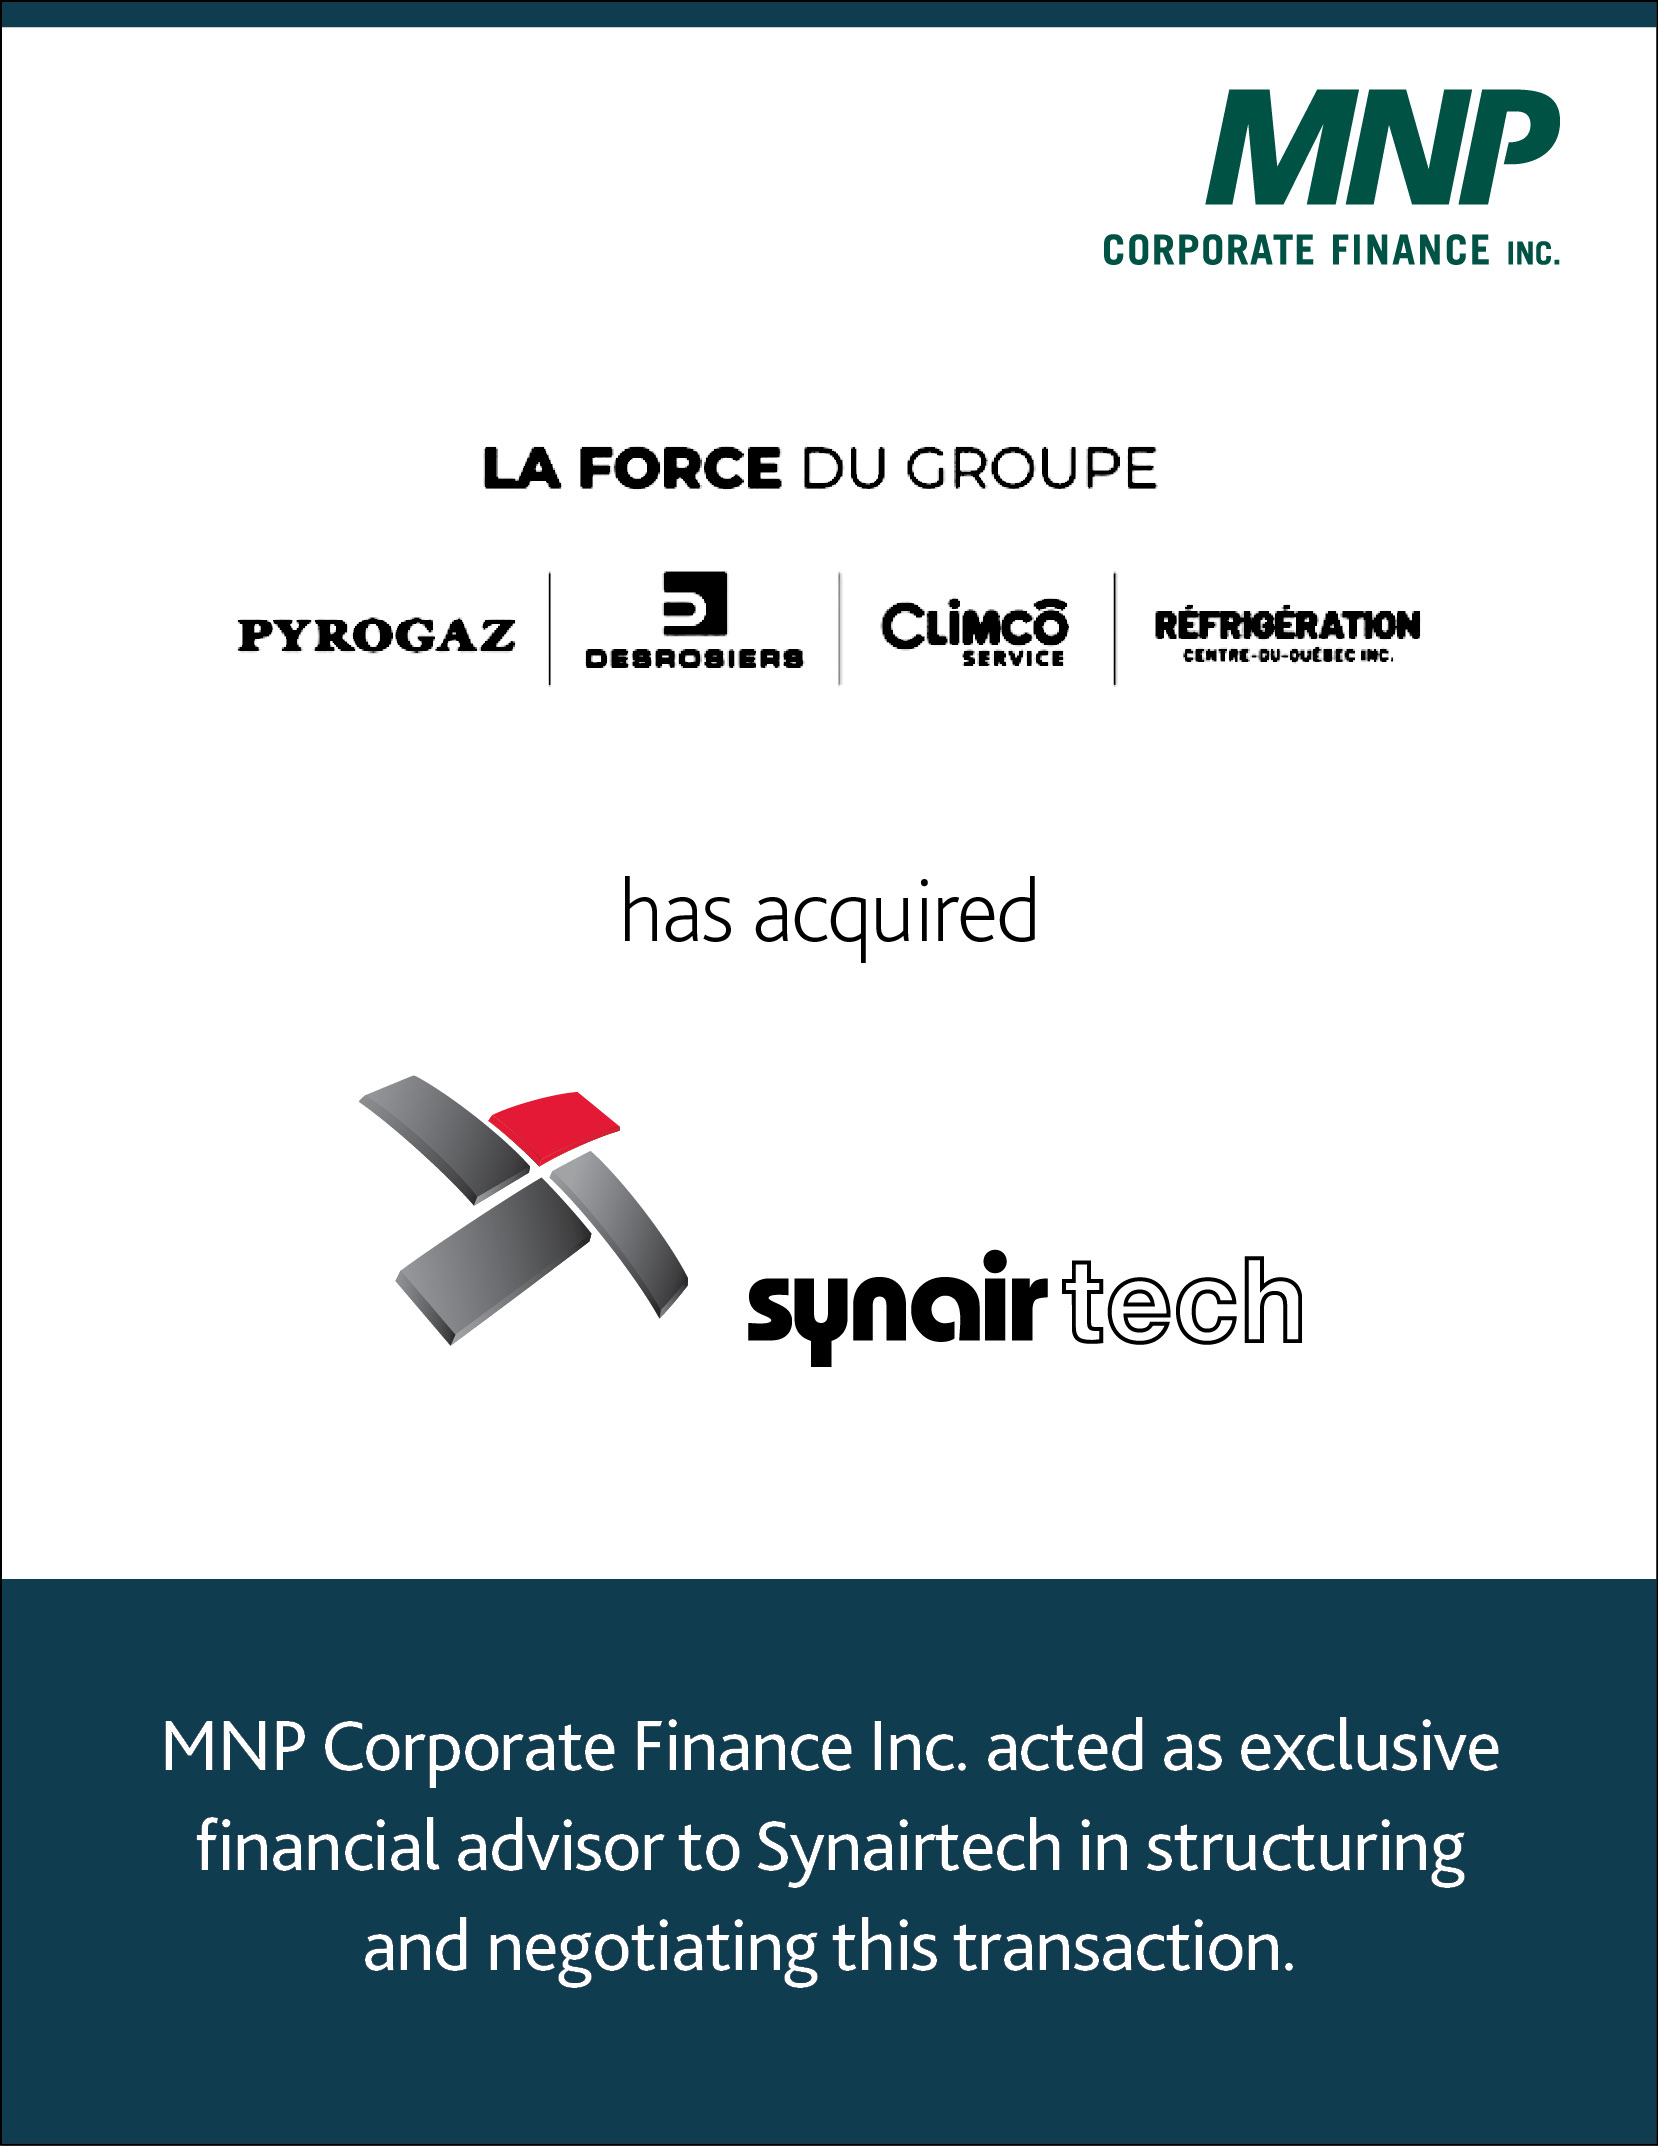 Synaire Tech acquires MNP Finance: A significant merger in the tech and finance sectors.